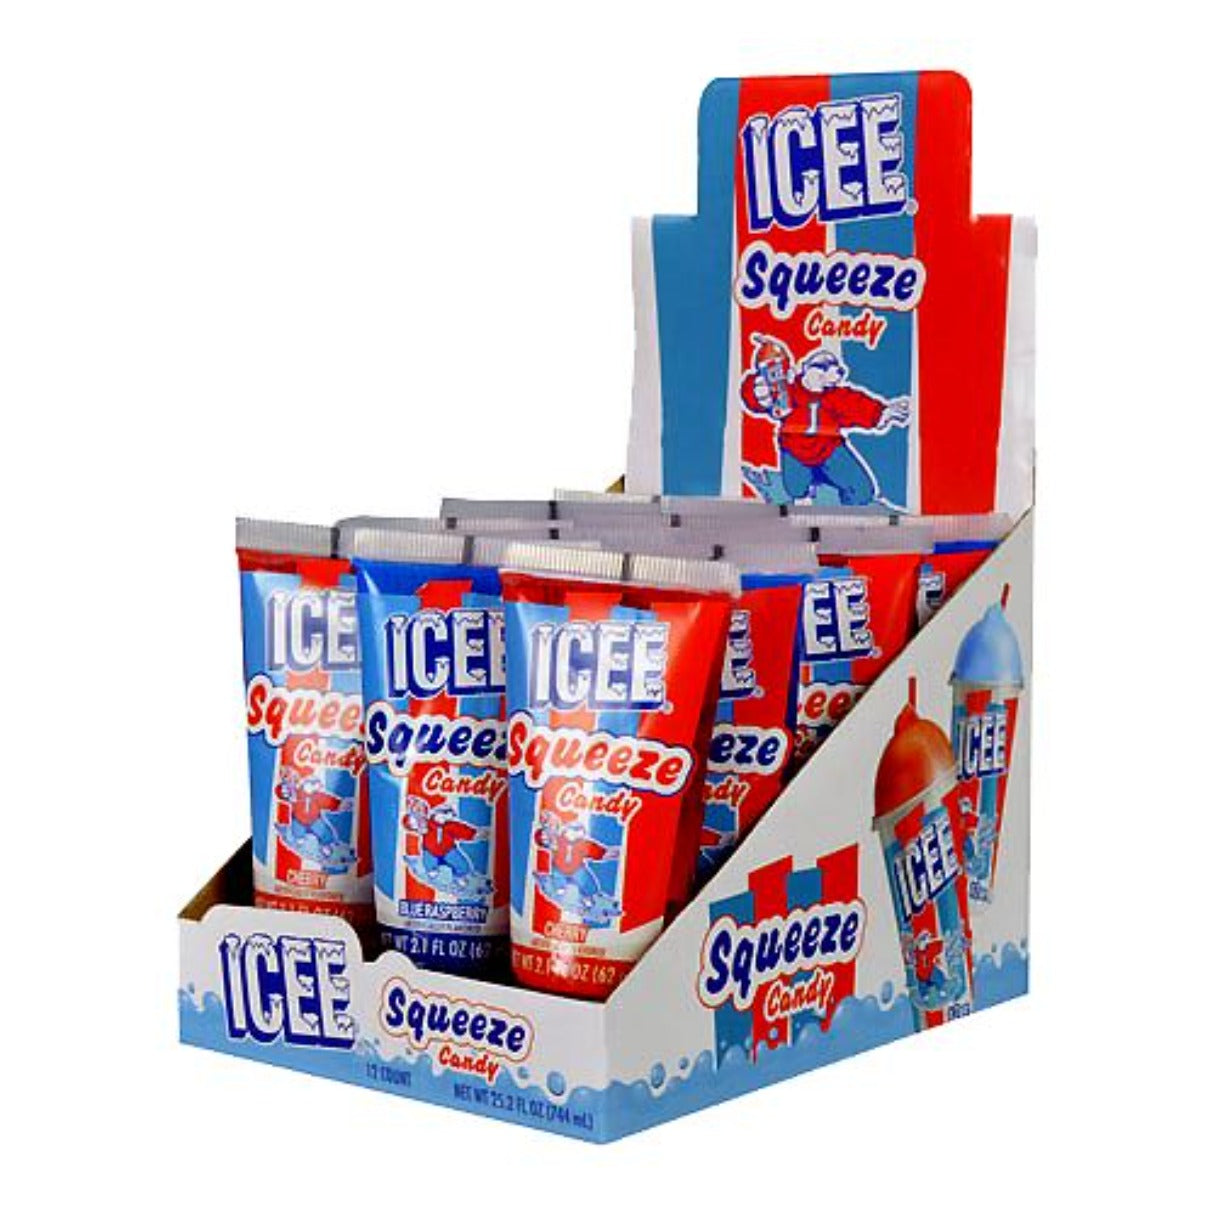 Koko's Icee Squeeze Candy 2.1oz - 12ct